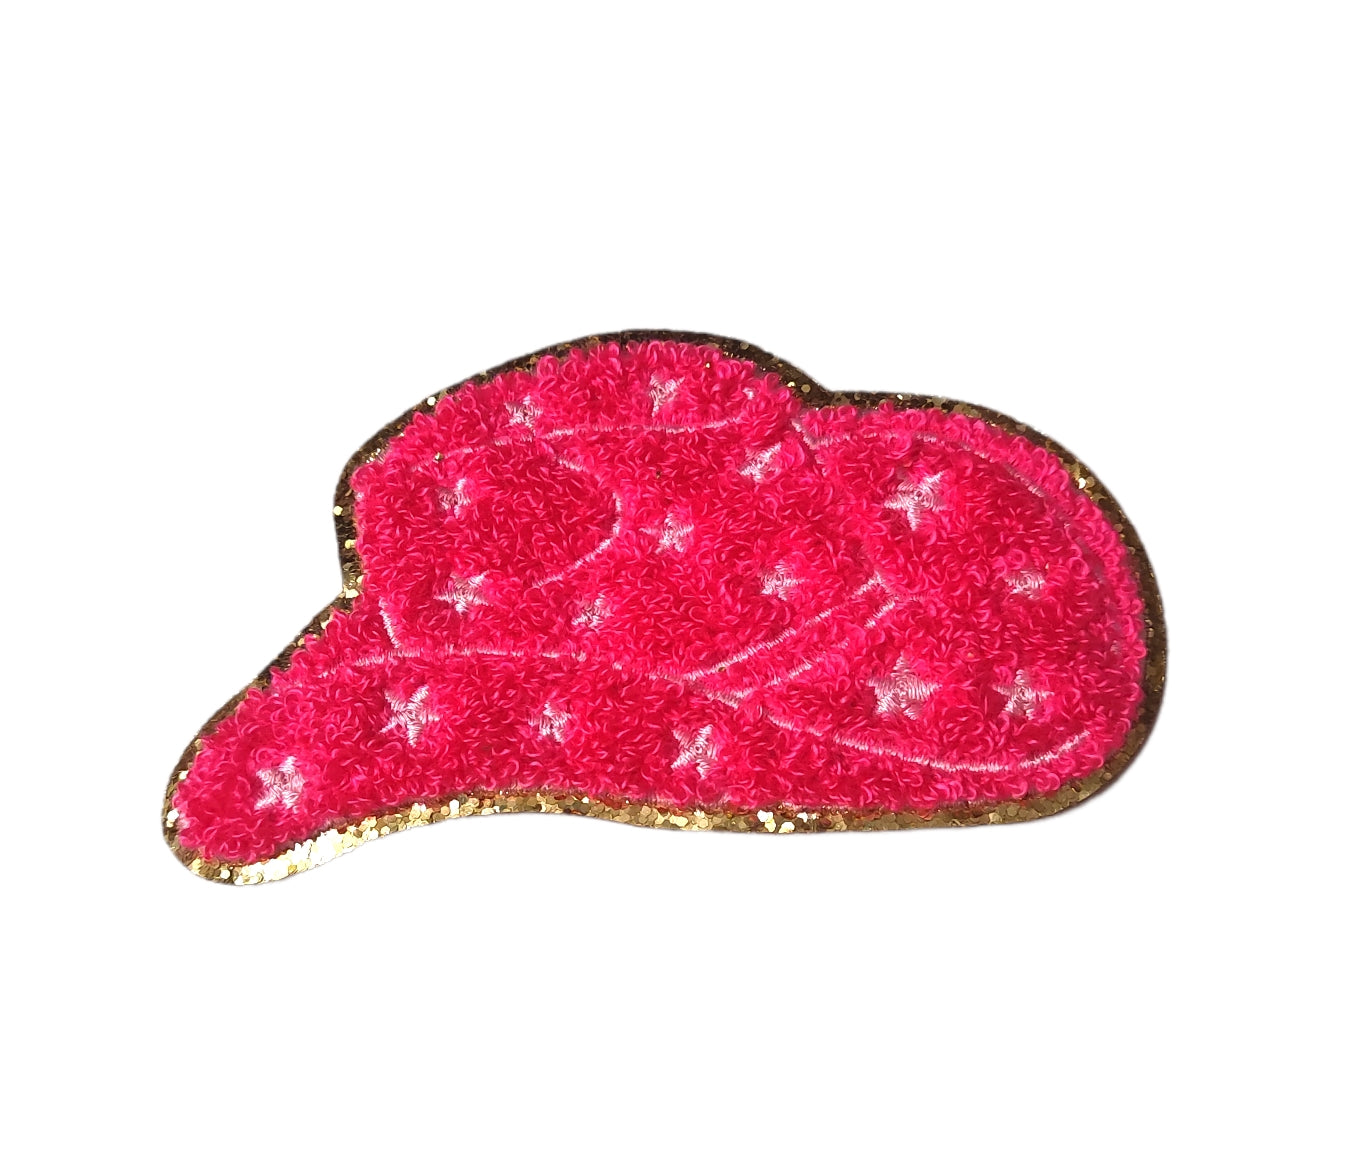 12pcs Cowgirl Themed Clothes Patches Compact Iron Patches Cowgirl Elements Coat Patches, Size: 3.94 x 3.94 x 0.79